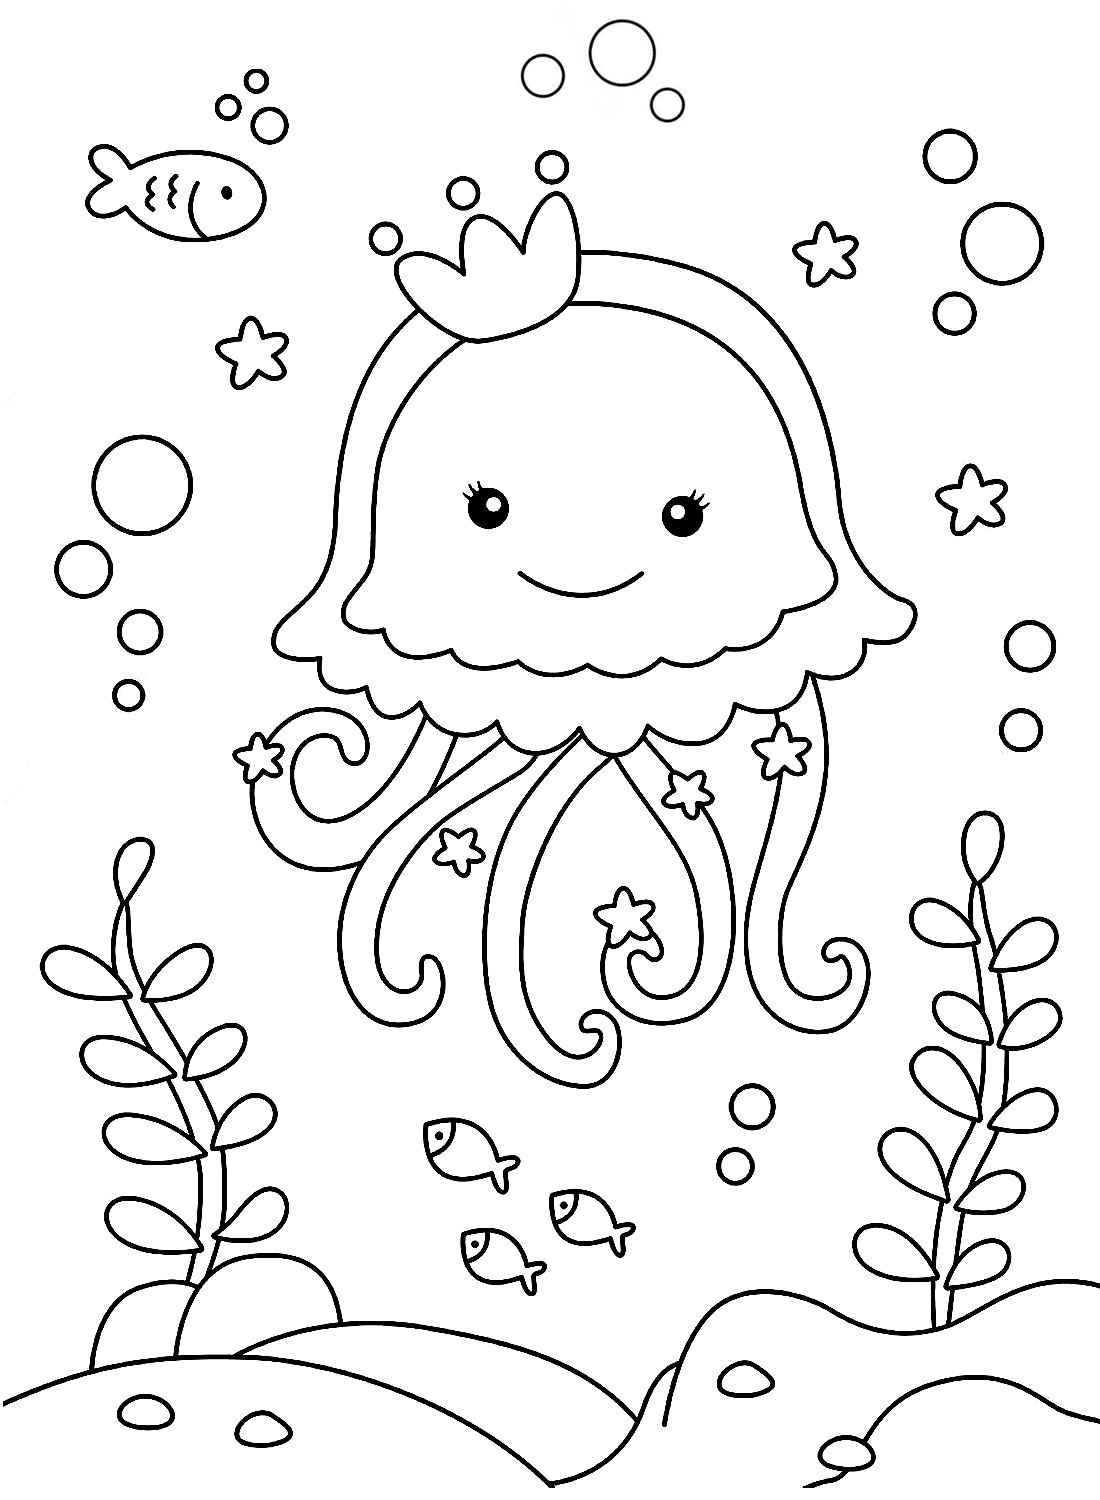 Printable jellyfish Coloring Page - Free Printable Coloring Pages